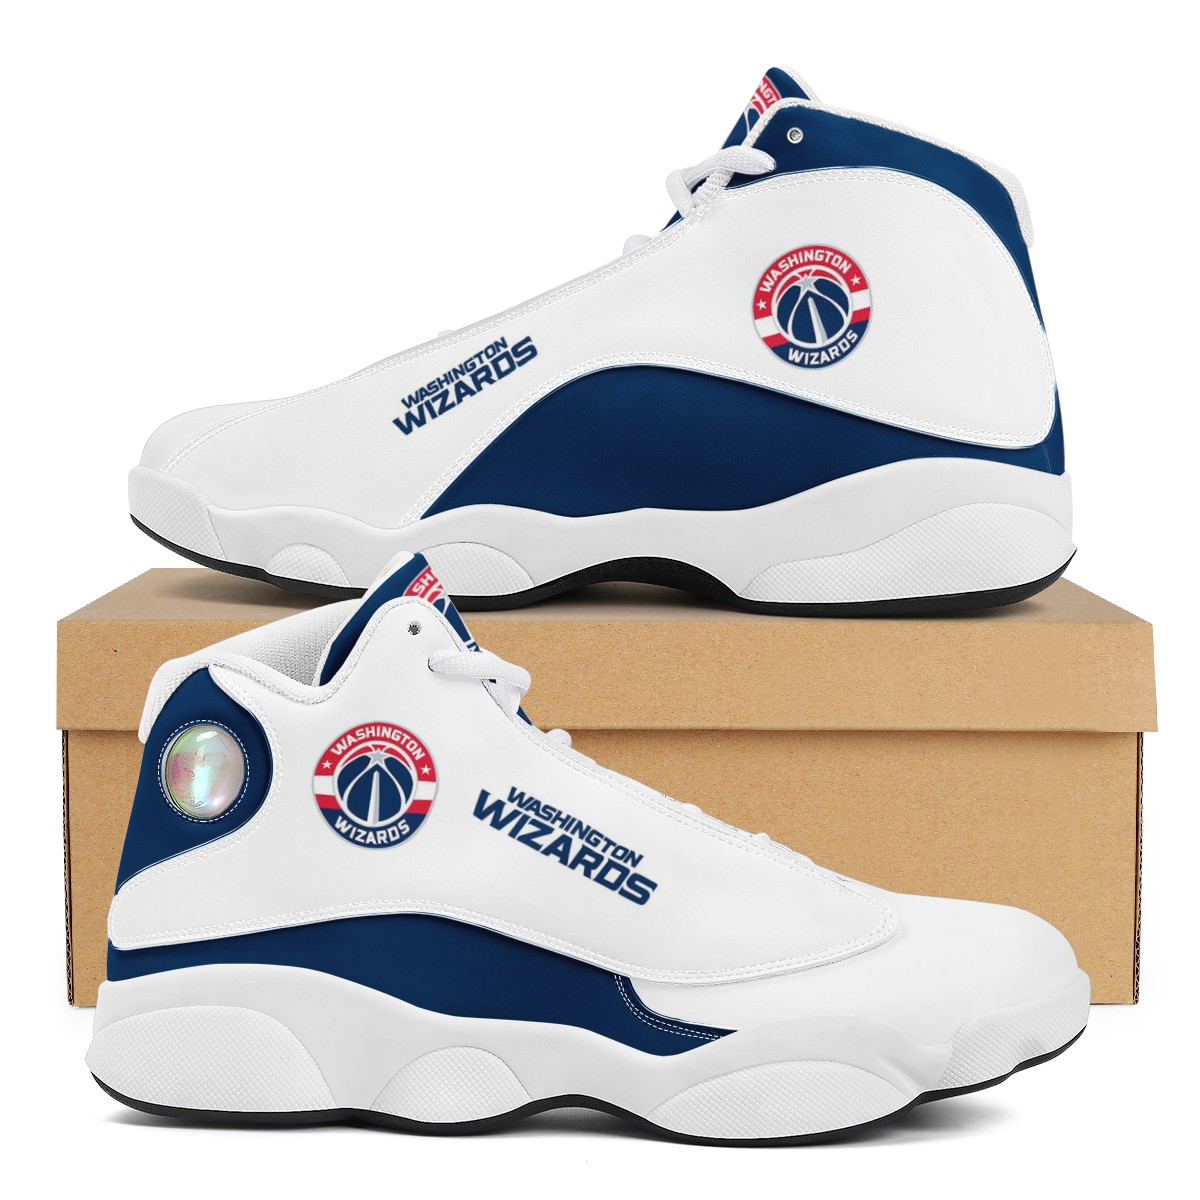 Women's Washington Wizards Limited Edition JD13 Sneakers 001